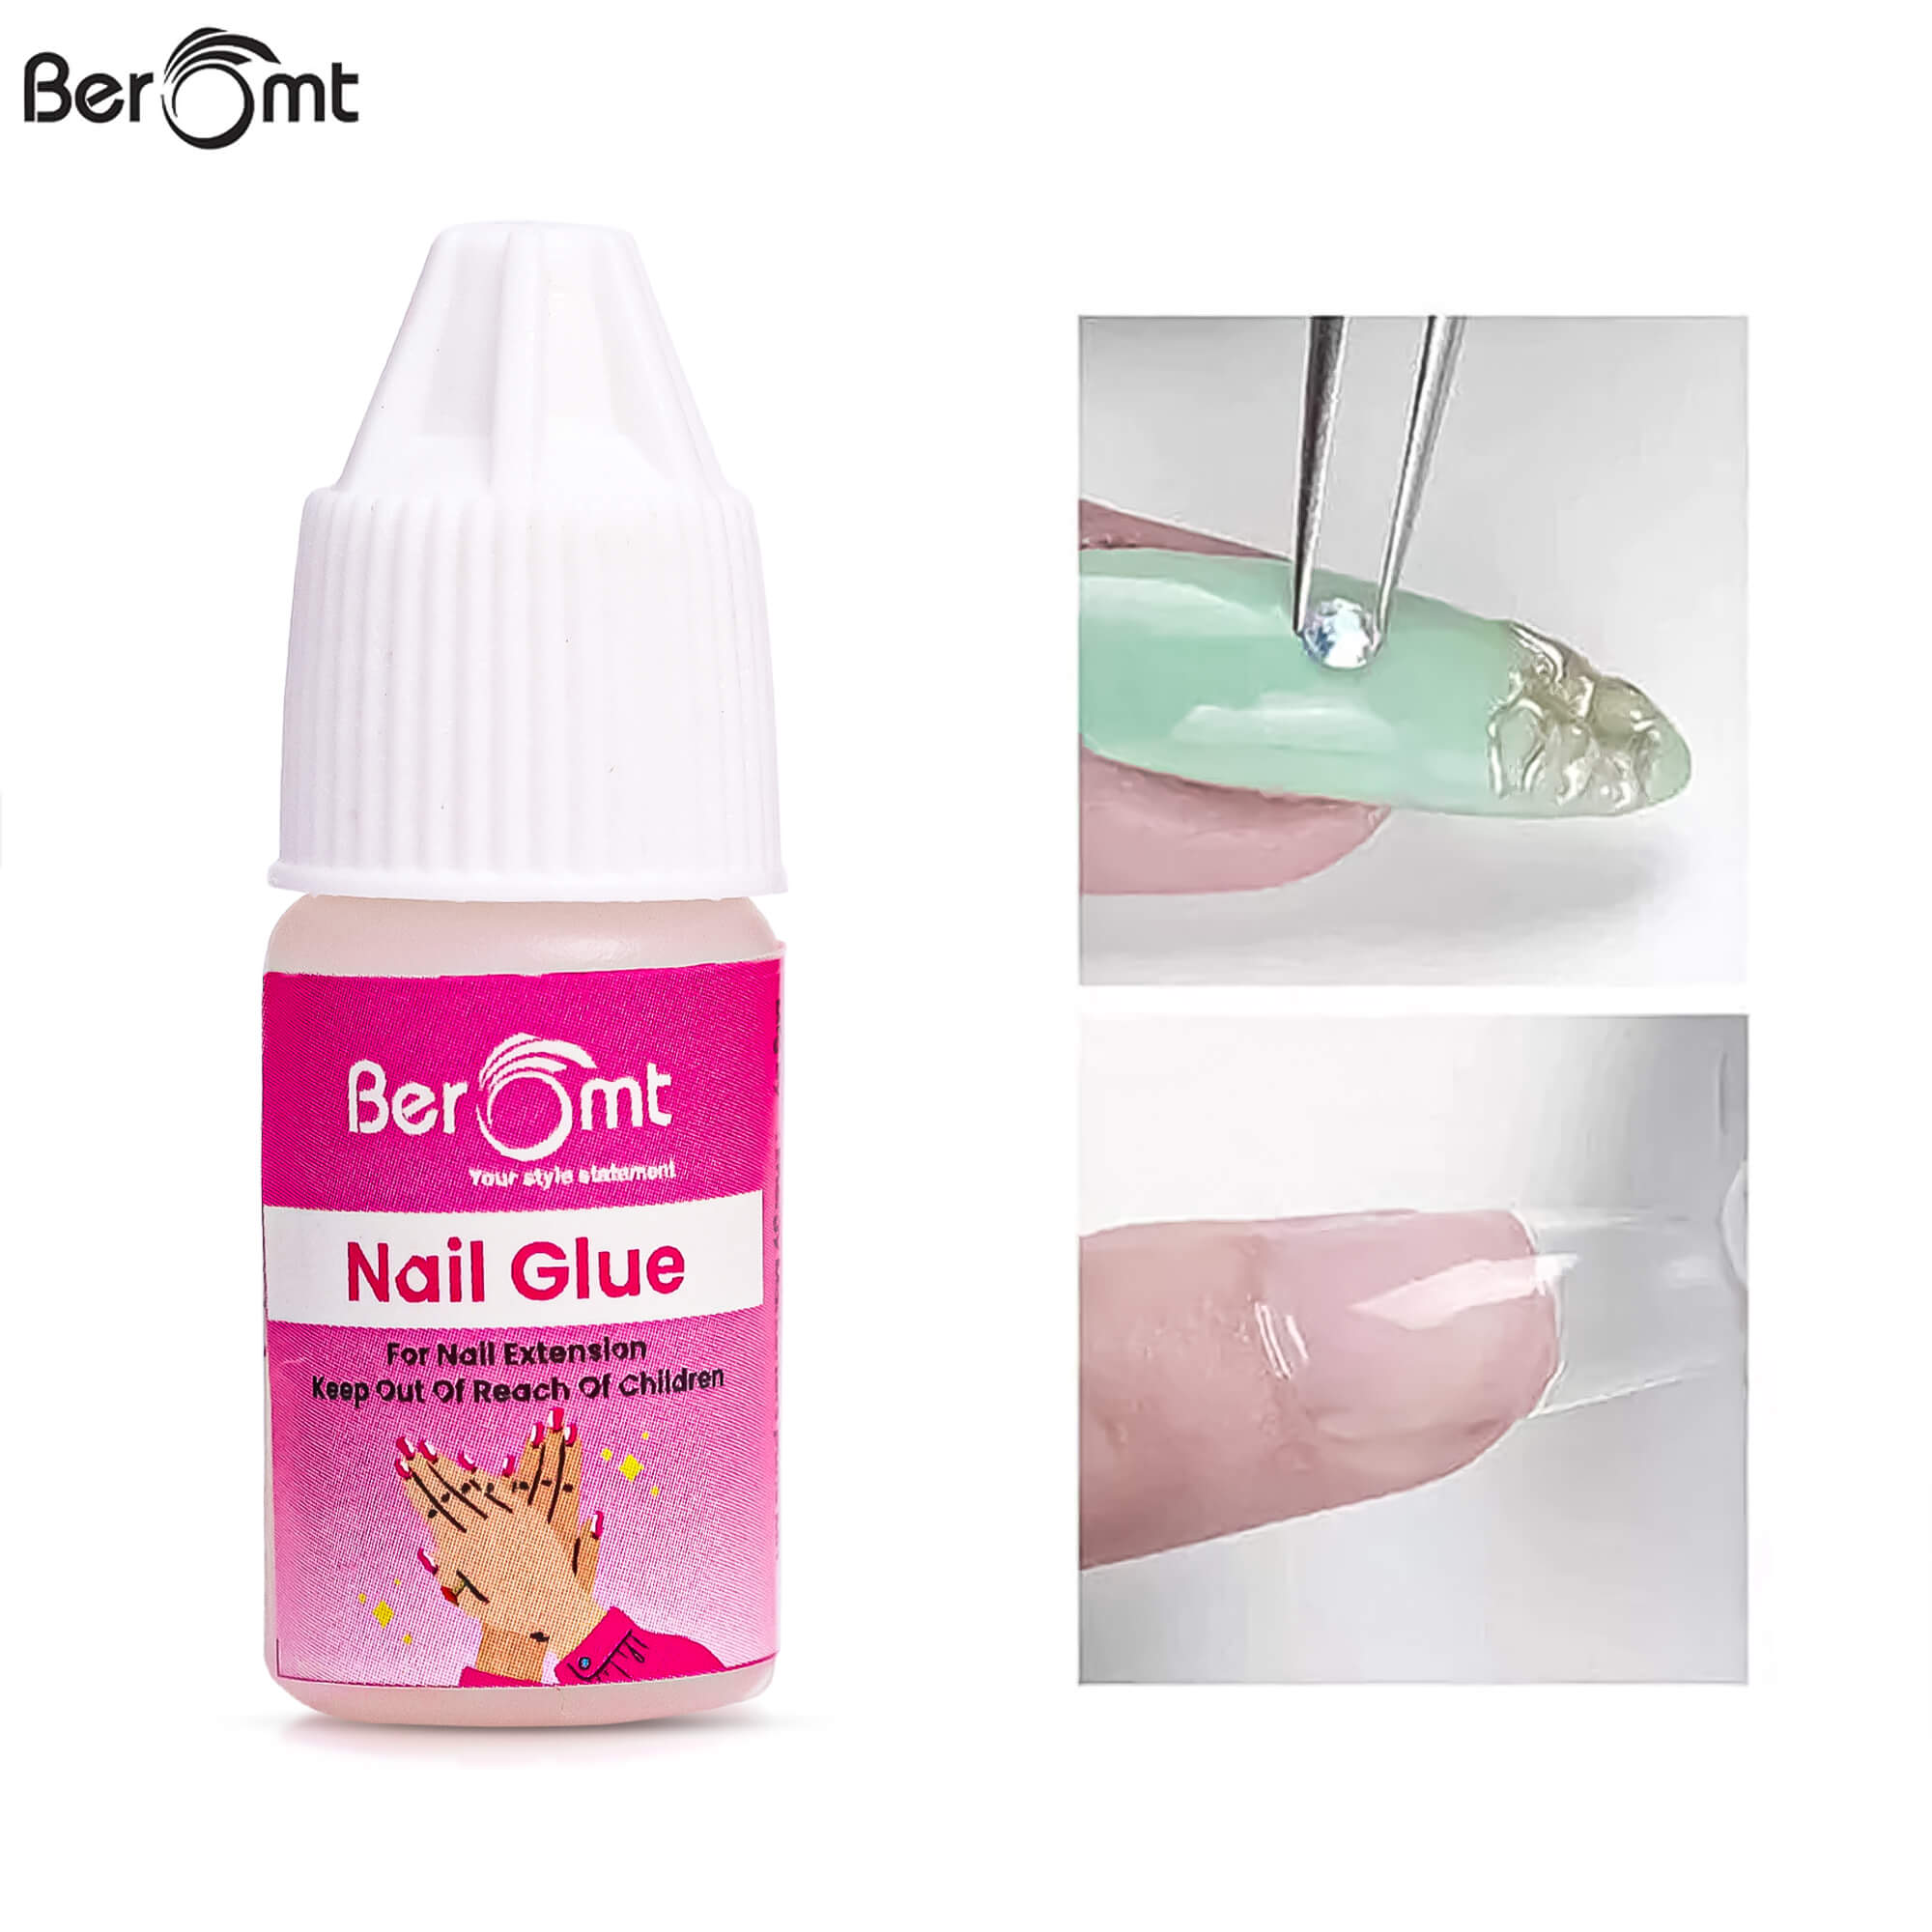 Is Nail Glue Toxic? The Honest Truth! [Nail Damaging?]